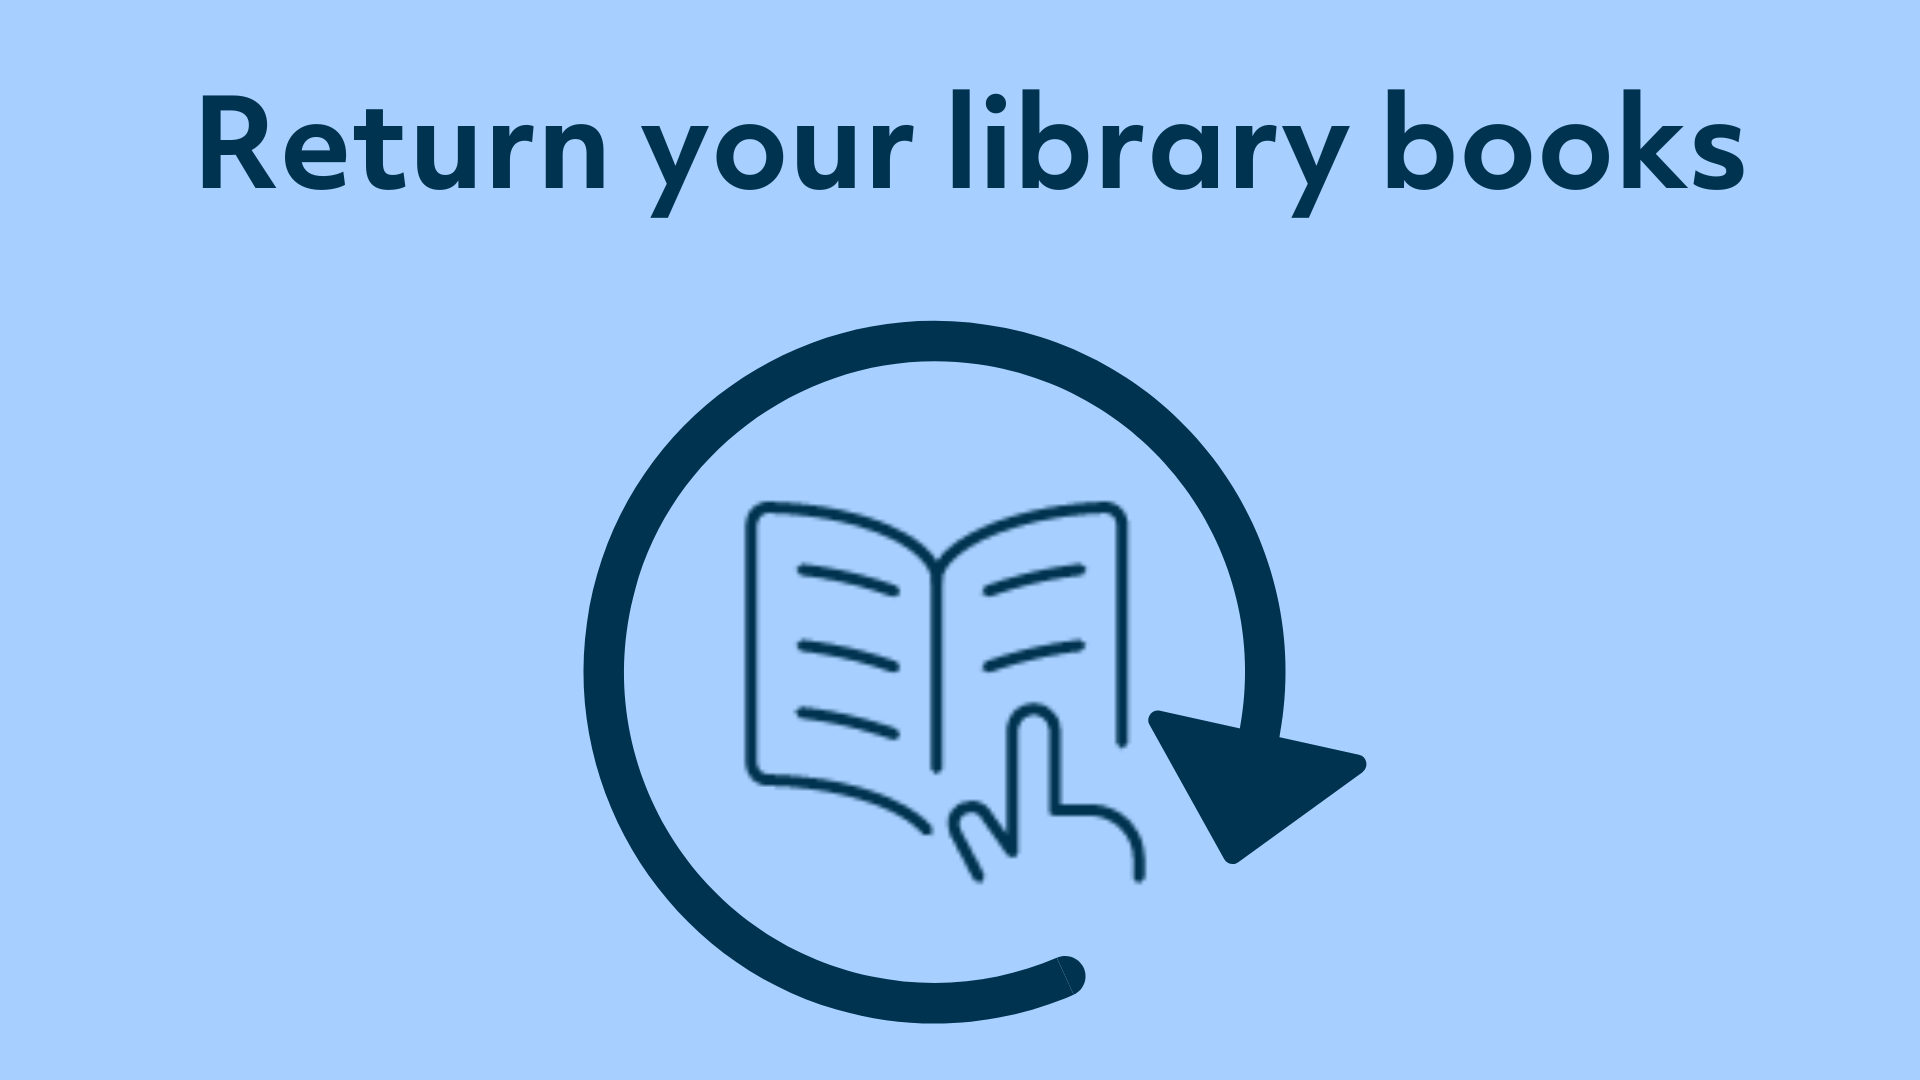 Text 'Return your library books' with grahpic of hand over book, surrounded by a circular arrow